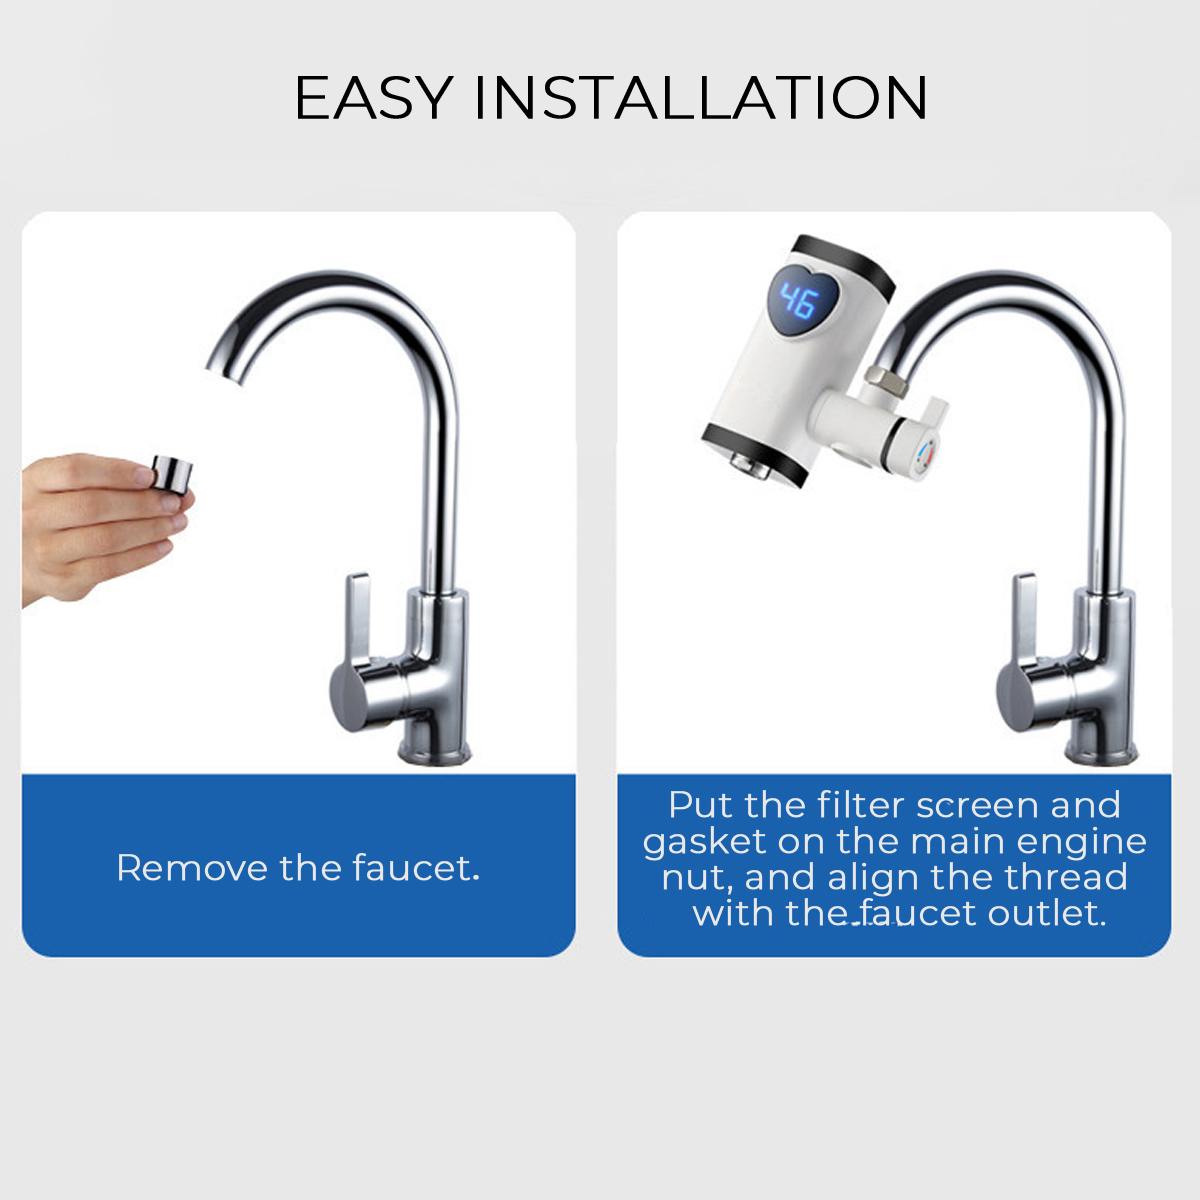 3000W Kitchen Faucet Instant Hot Water Digital LCD Display Electric Faucet Water Heater Electric Tankless Fast Heating Water Tap